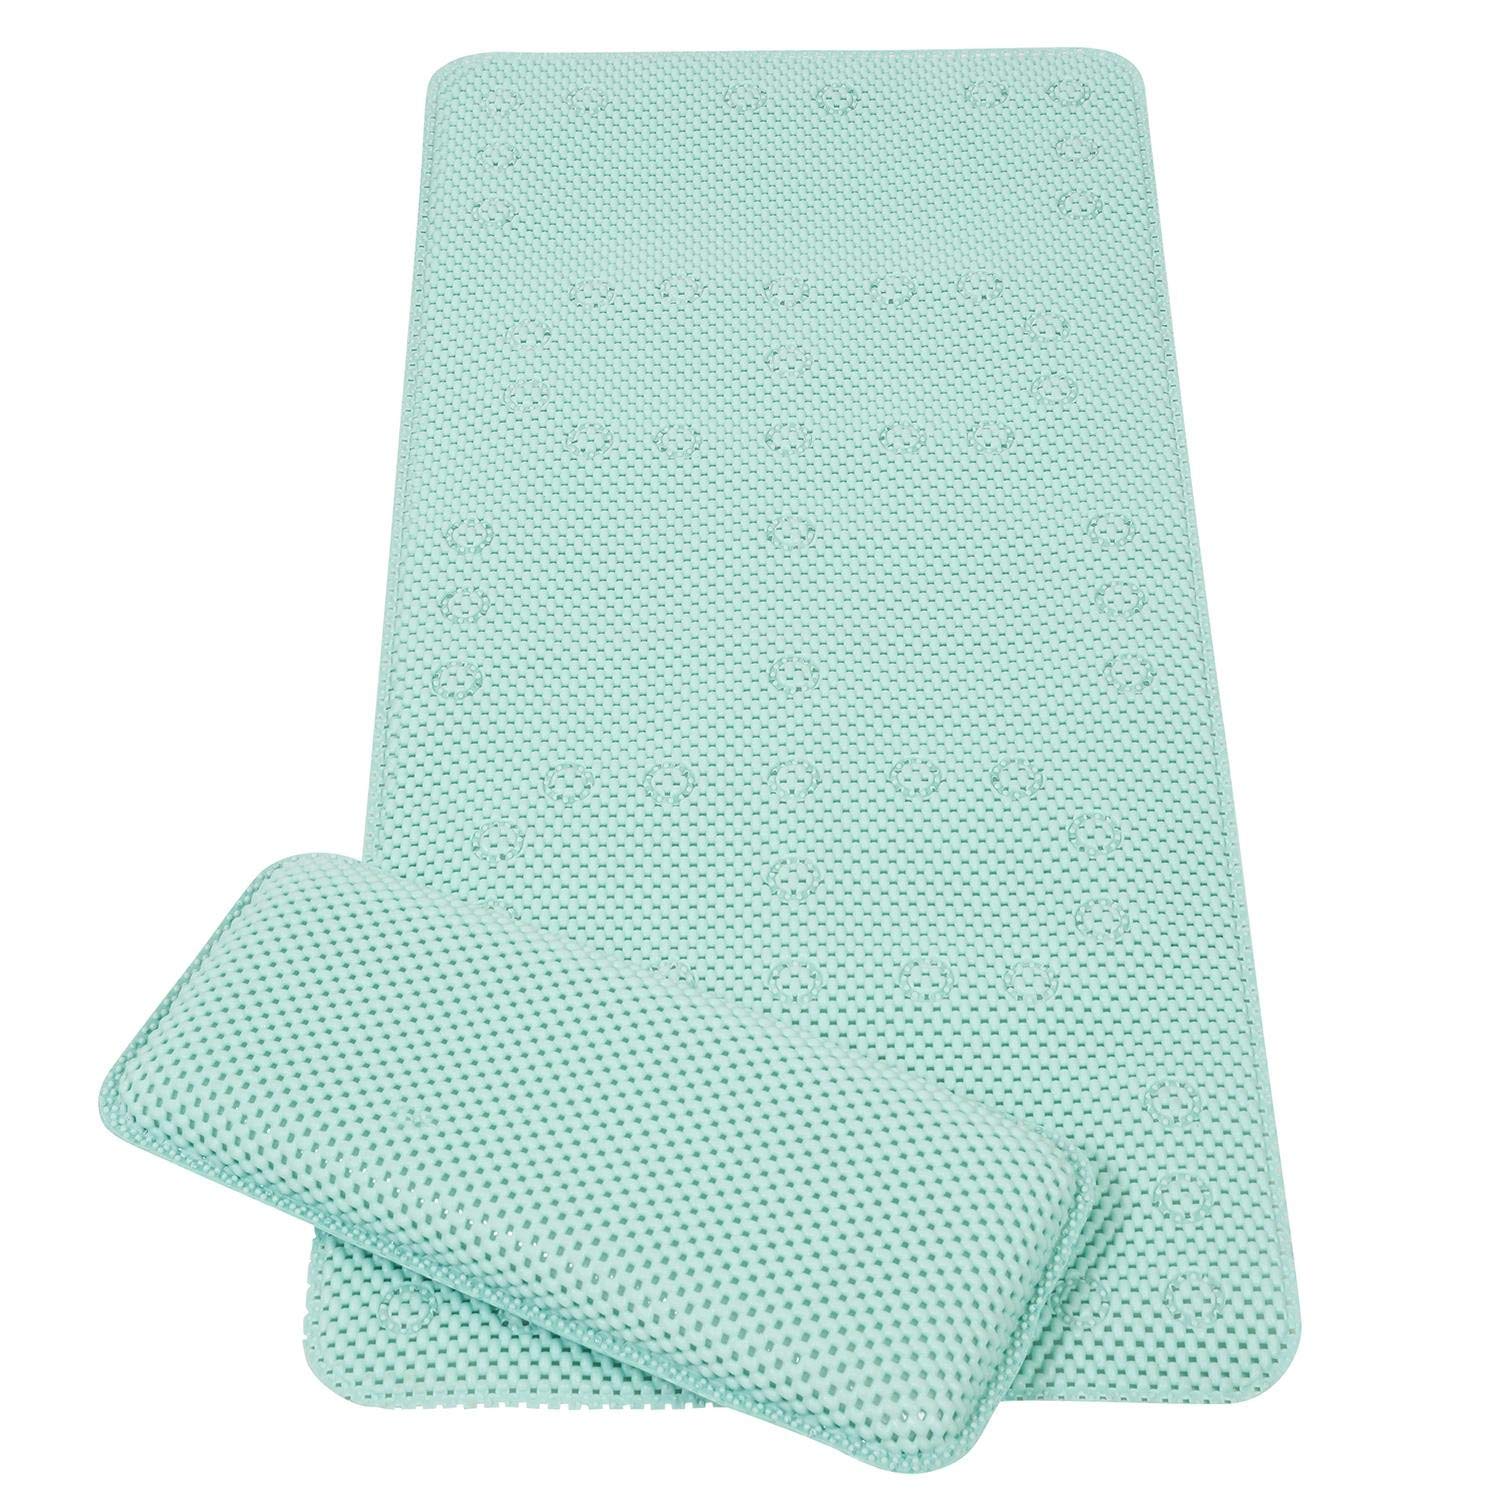 Clevamama 3529 Bath Mat with Knee Pad, Multi-Colour, 100 g